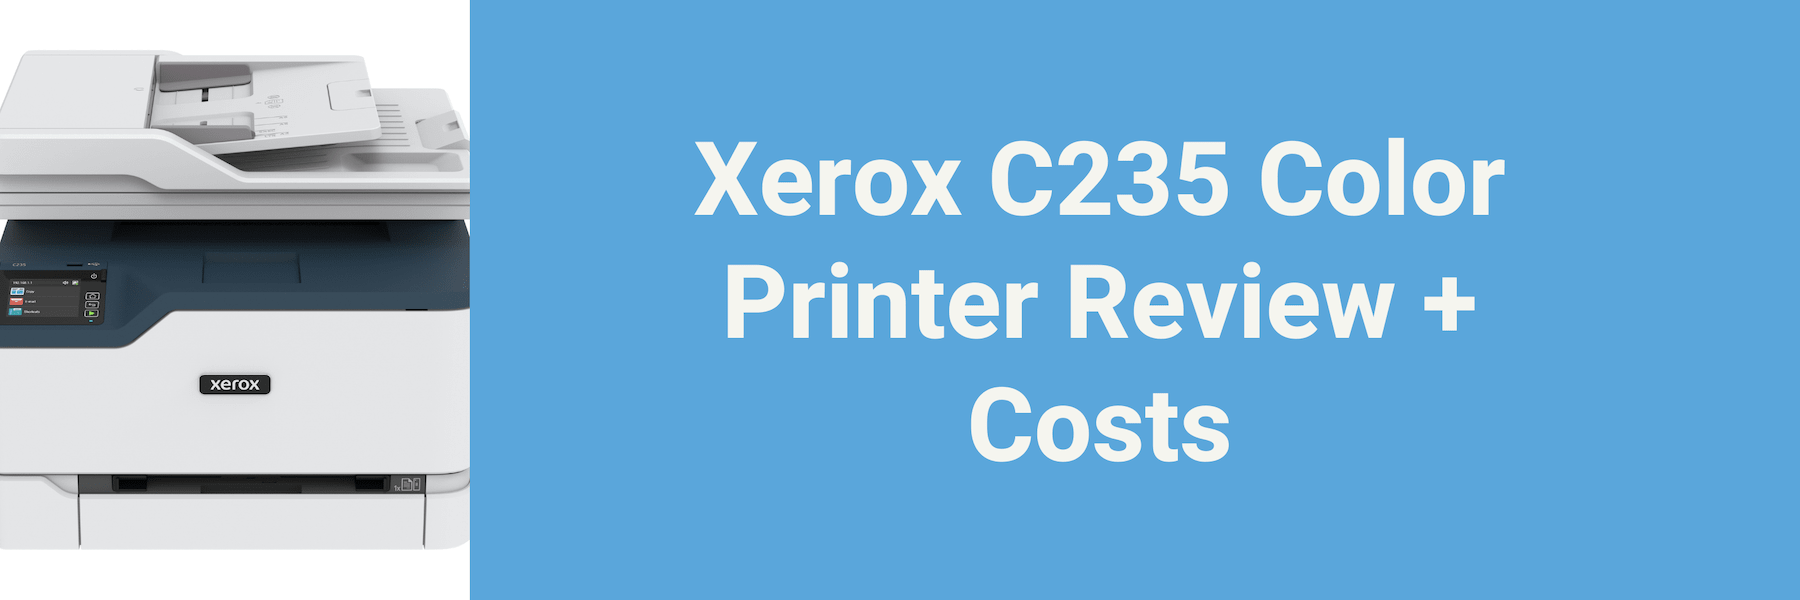 A picture of the Xerox C235 next to the text "Xerox C235 Color Printer Review + Costs"